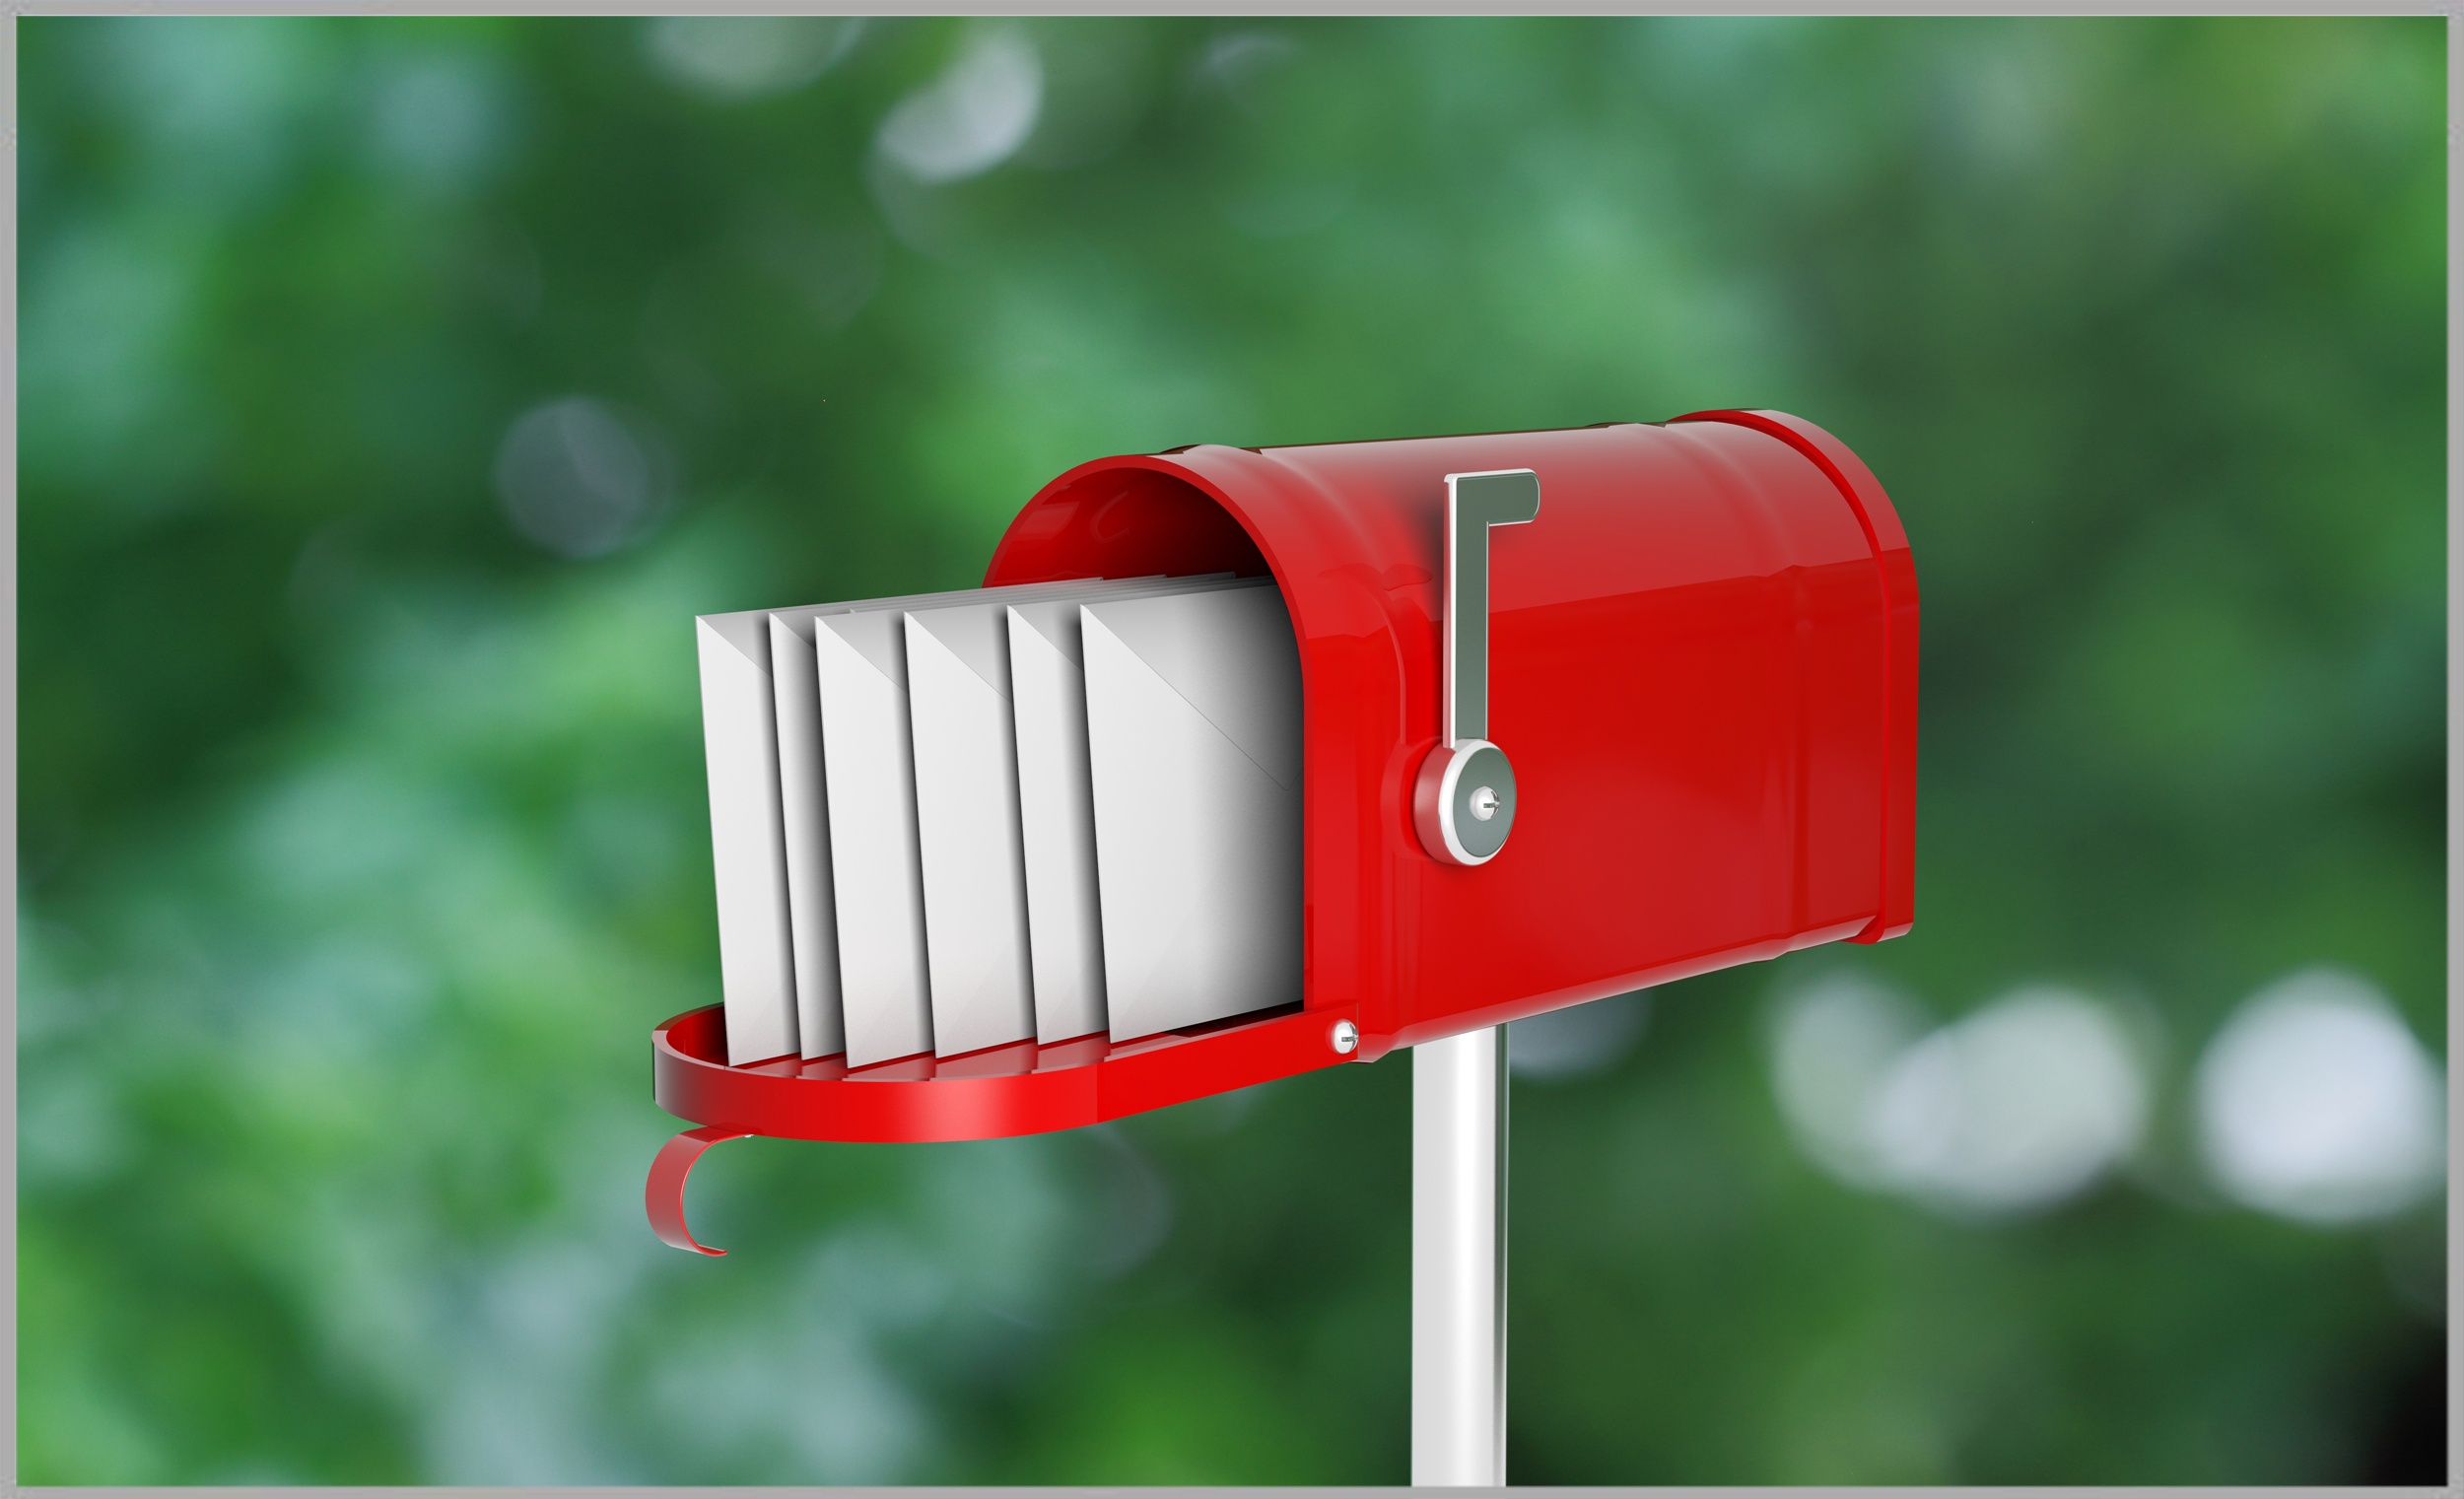 Mistakes let down new malware phishing email impersonating Australia Post MailGuard feature.jpg